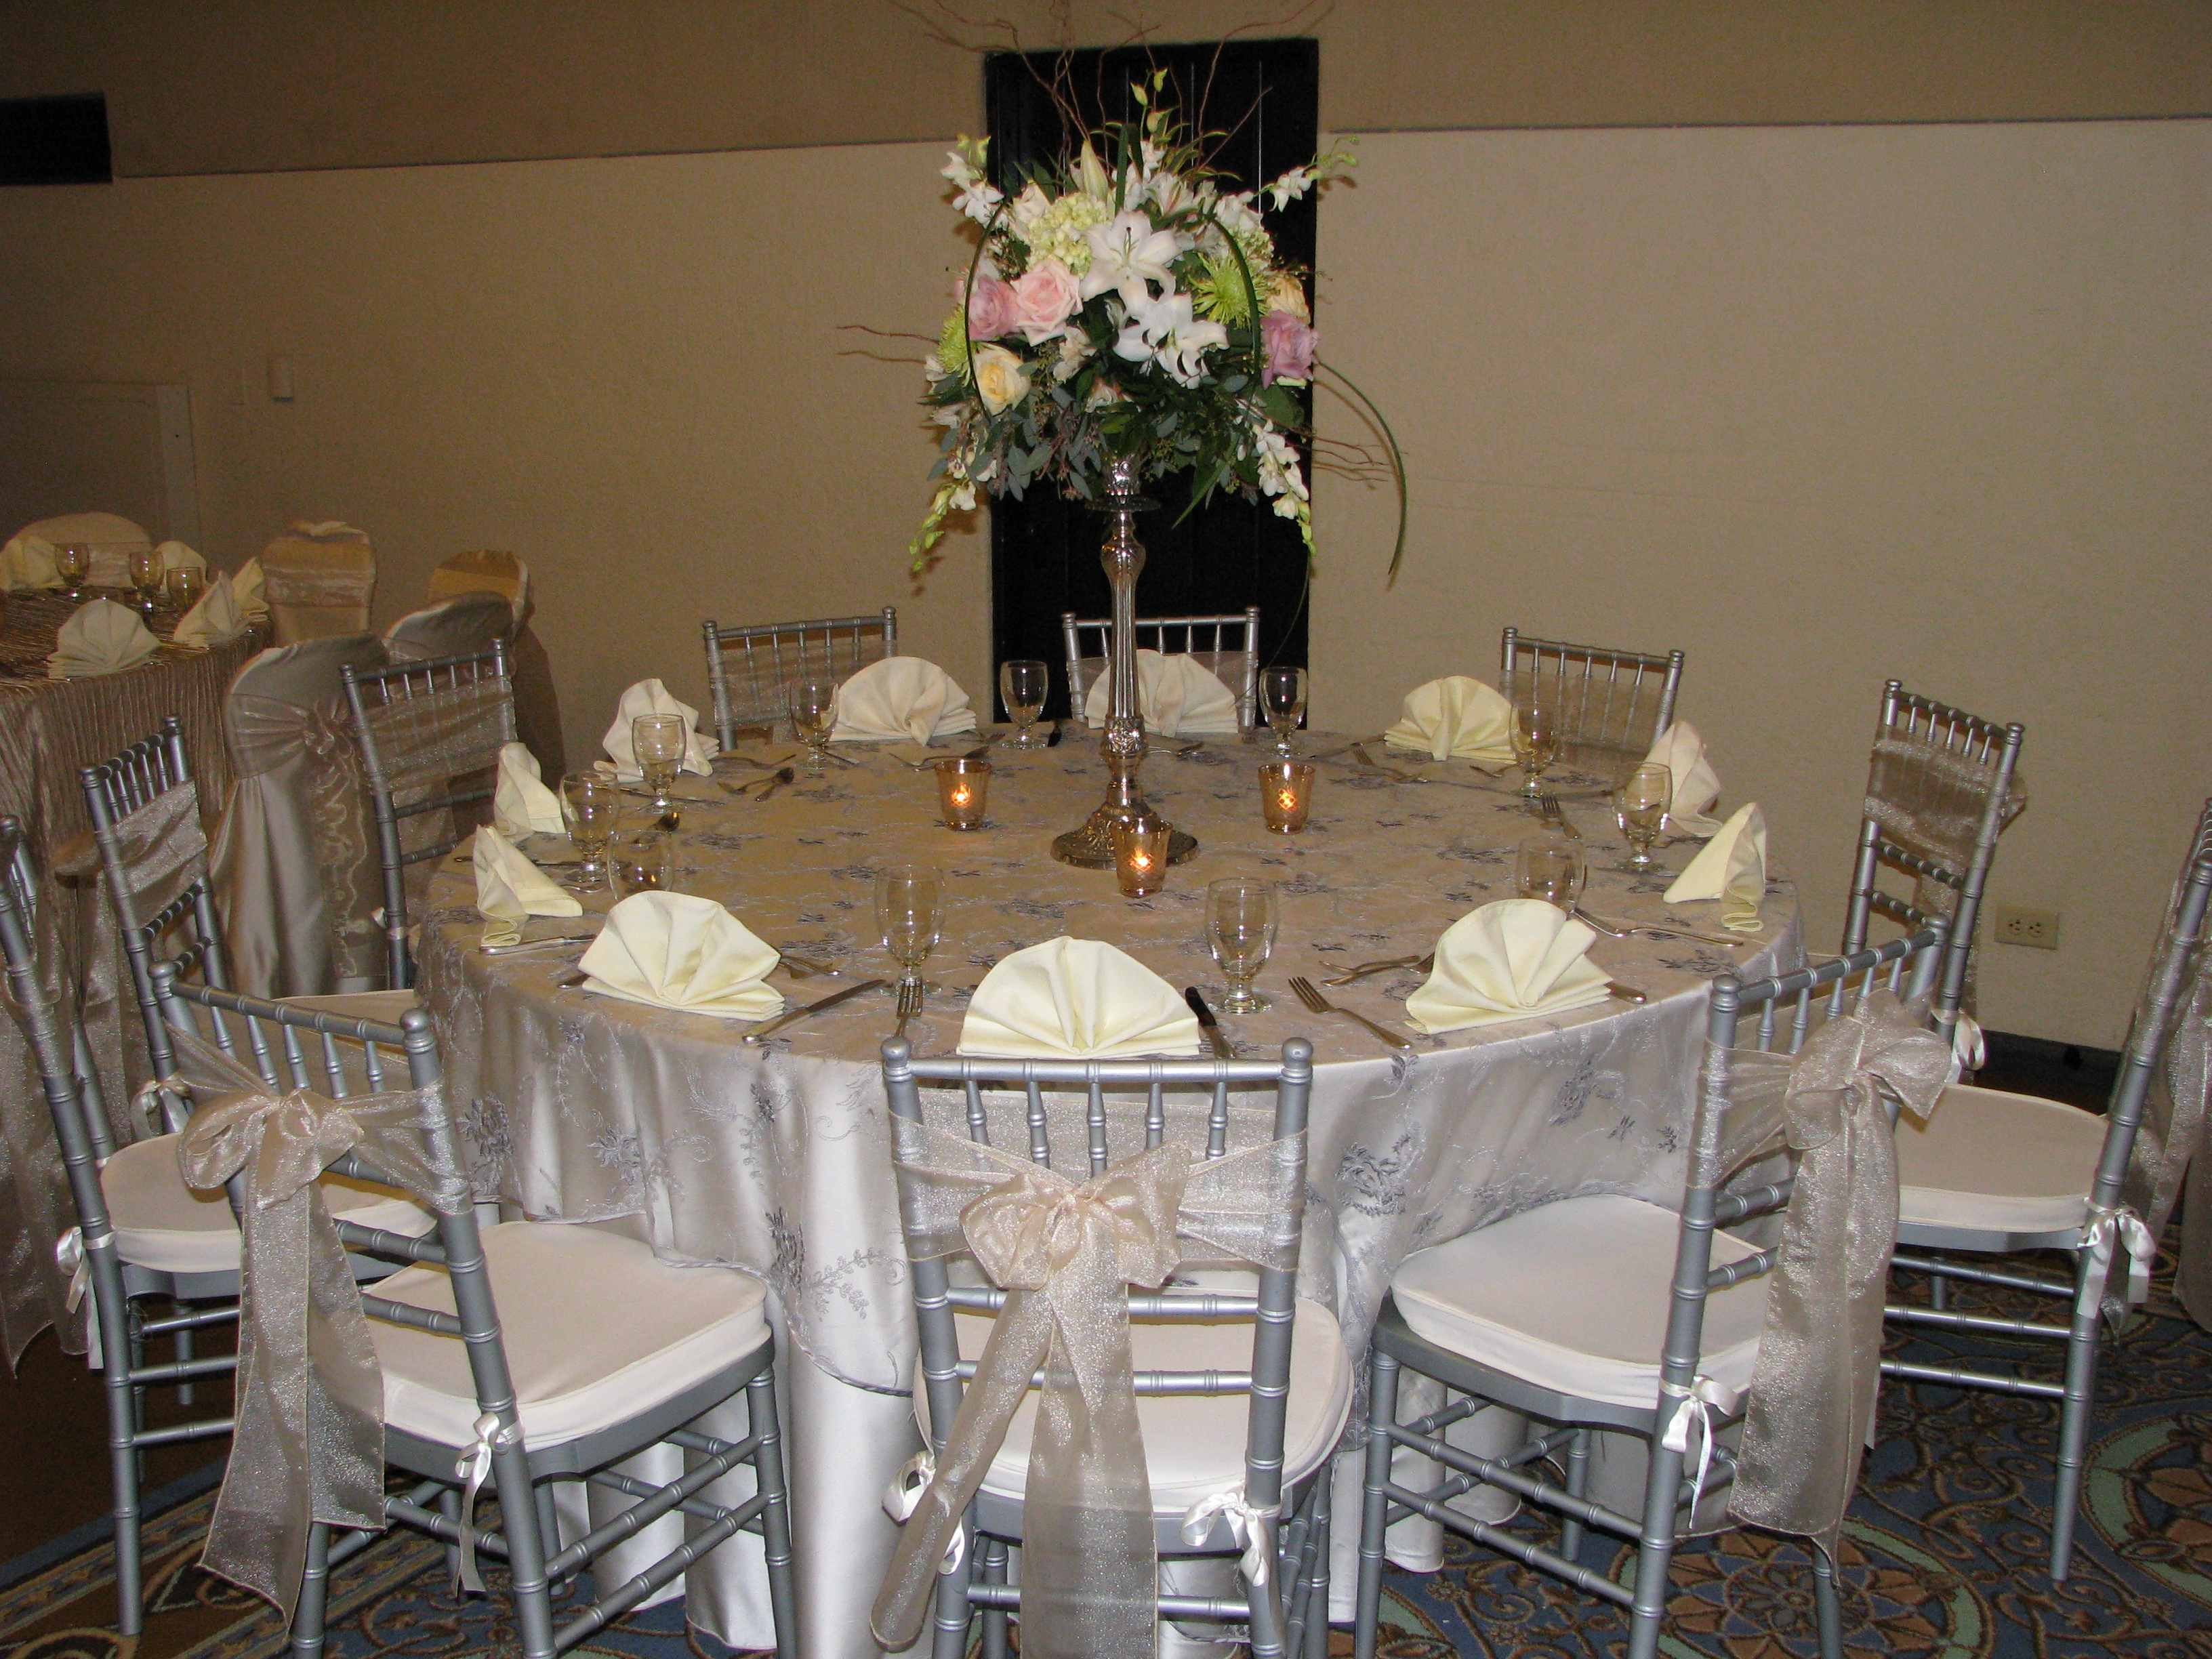 132" Round Polyester Tablecloth